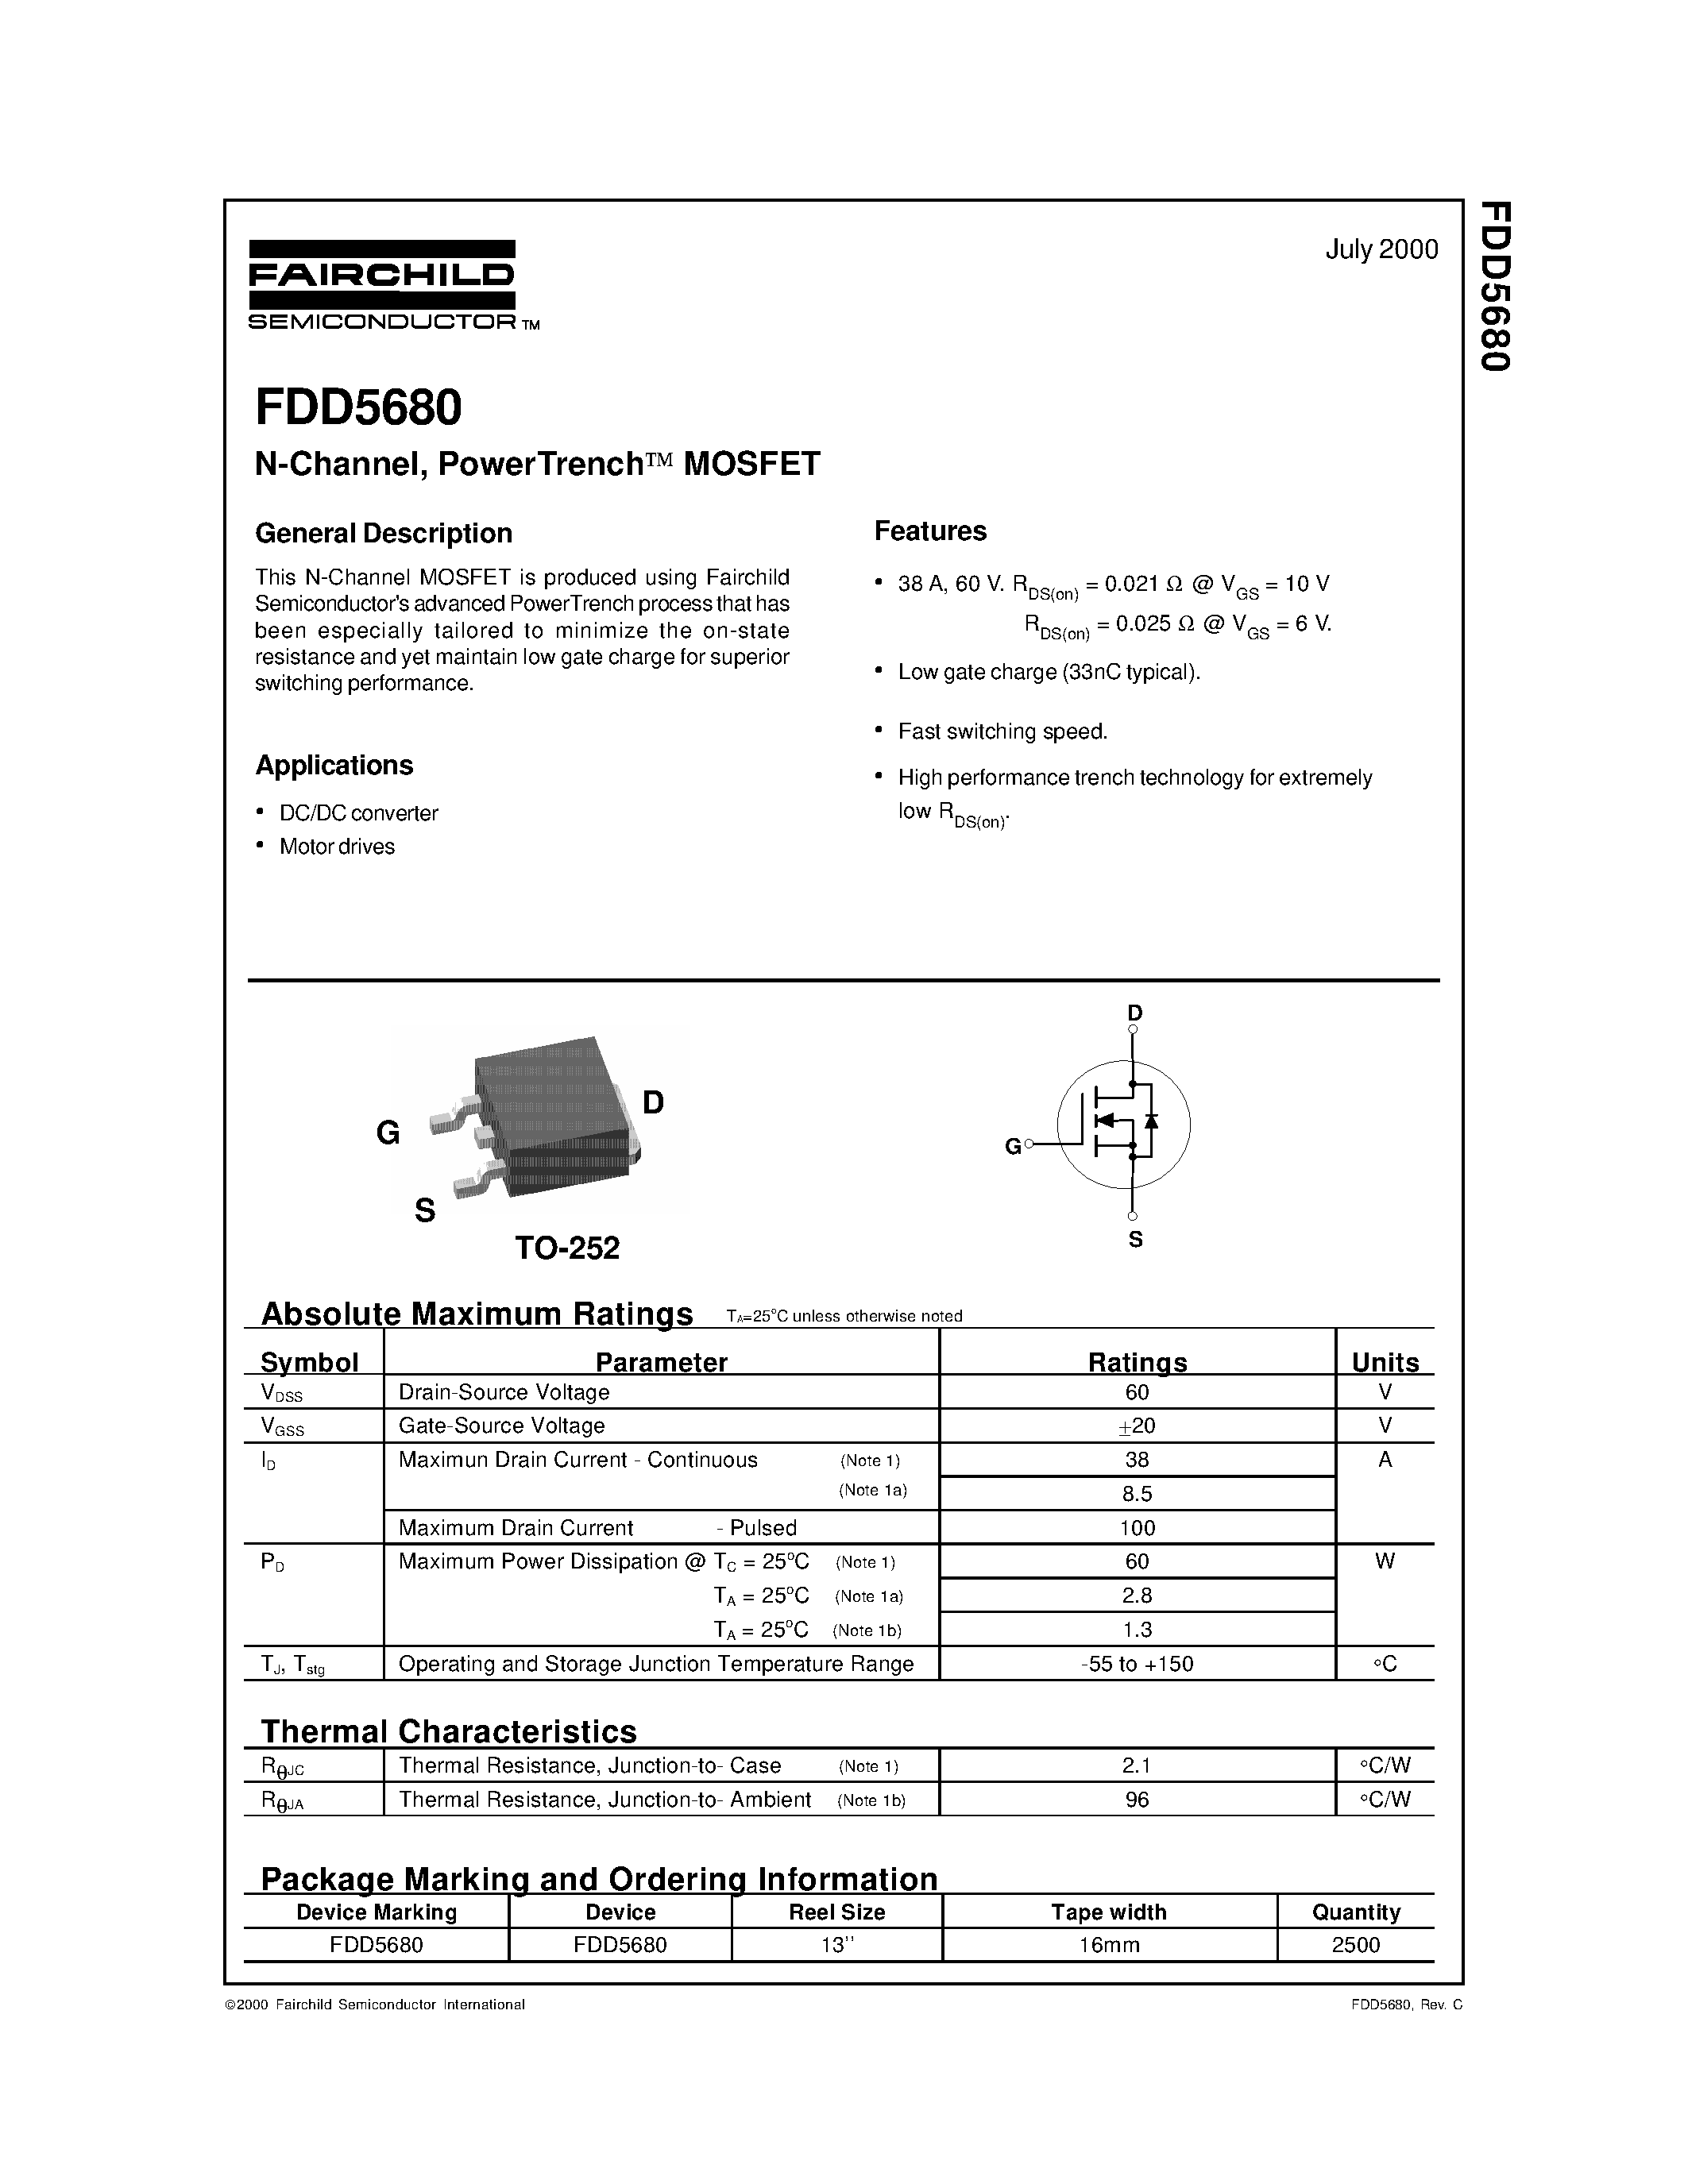 Даташит FDD5680 - N-Channel/ PowerTrench MOSFET страница 1